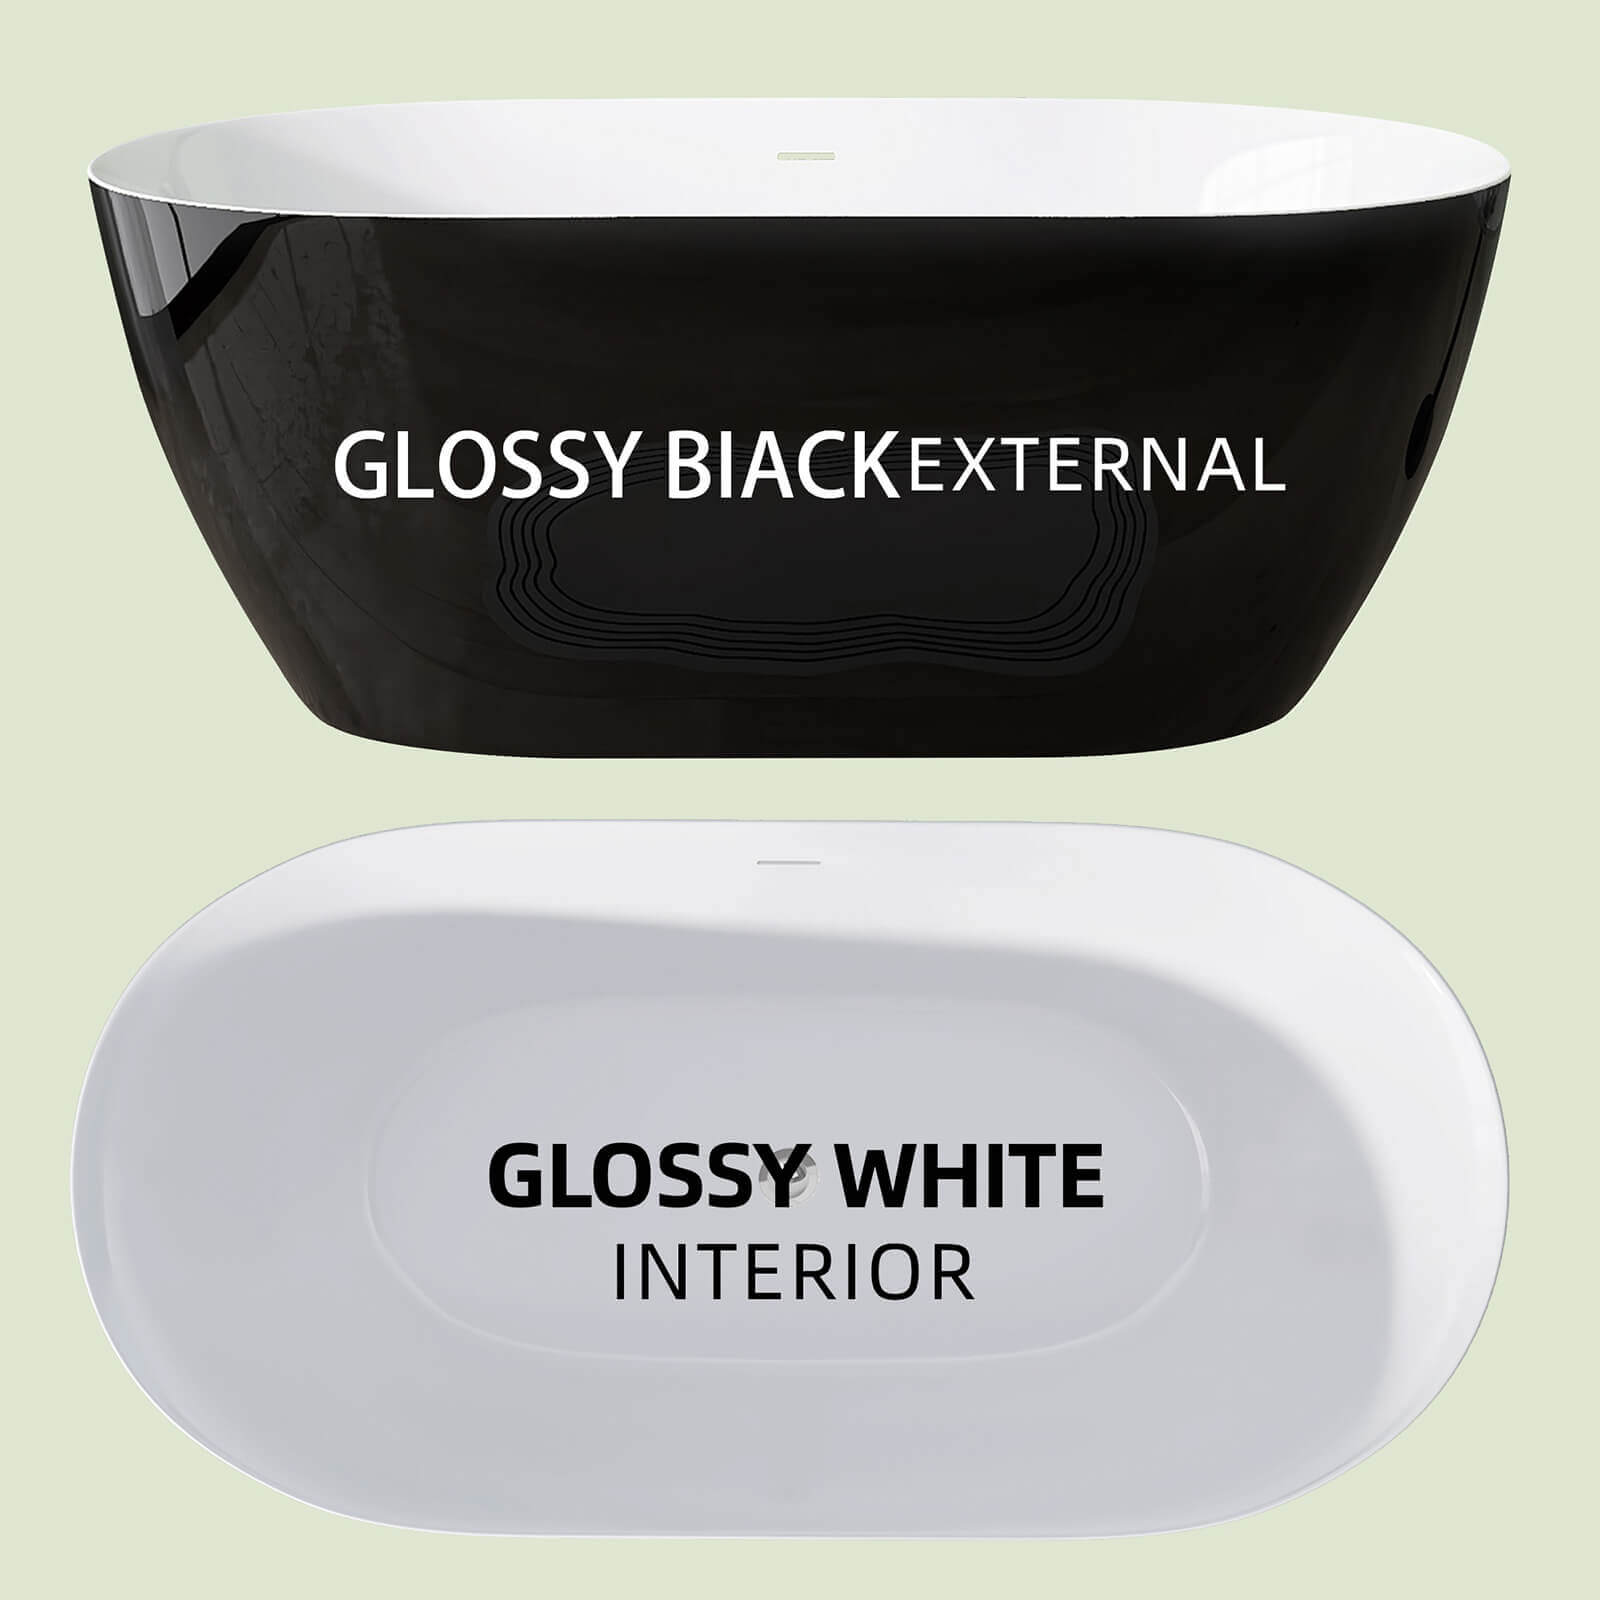 Comparison of the inner and outer tubs of the glossy black 59 inch anti clog classic oval acrylic bathtub